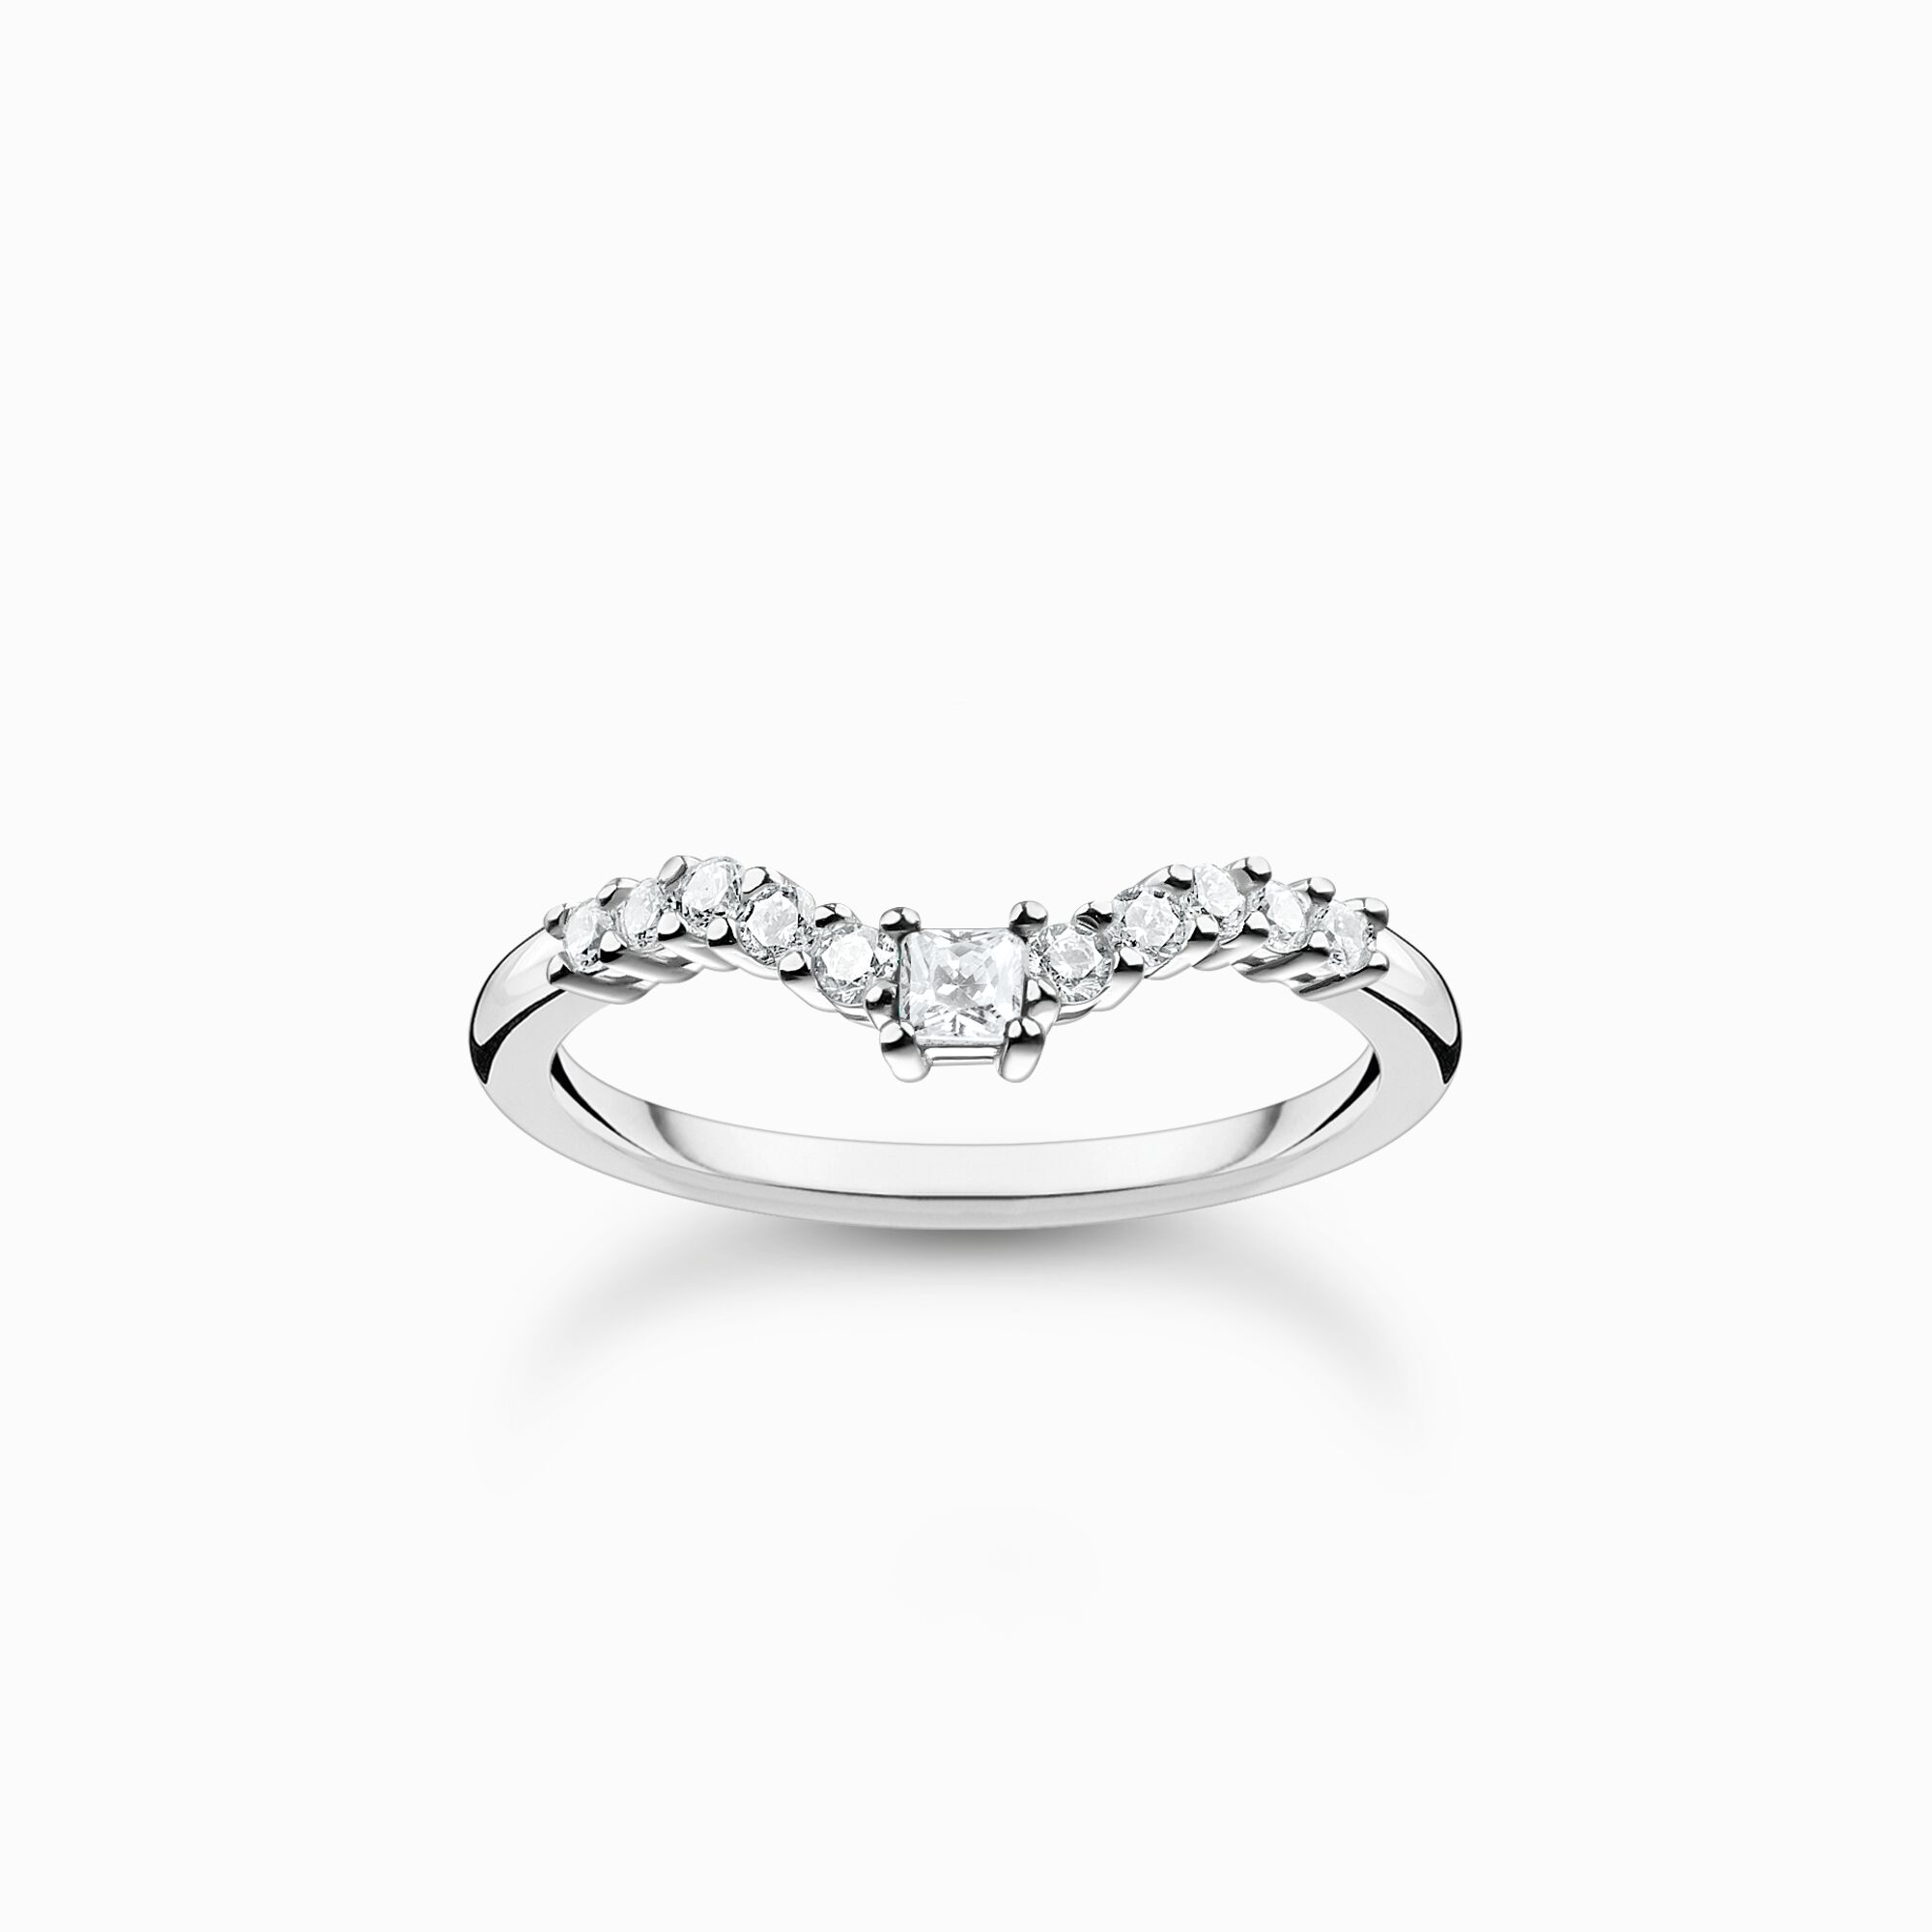 Ring with white stones silver from the Charming Collection collection in the THOMAS SABO online store